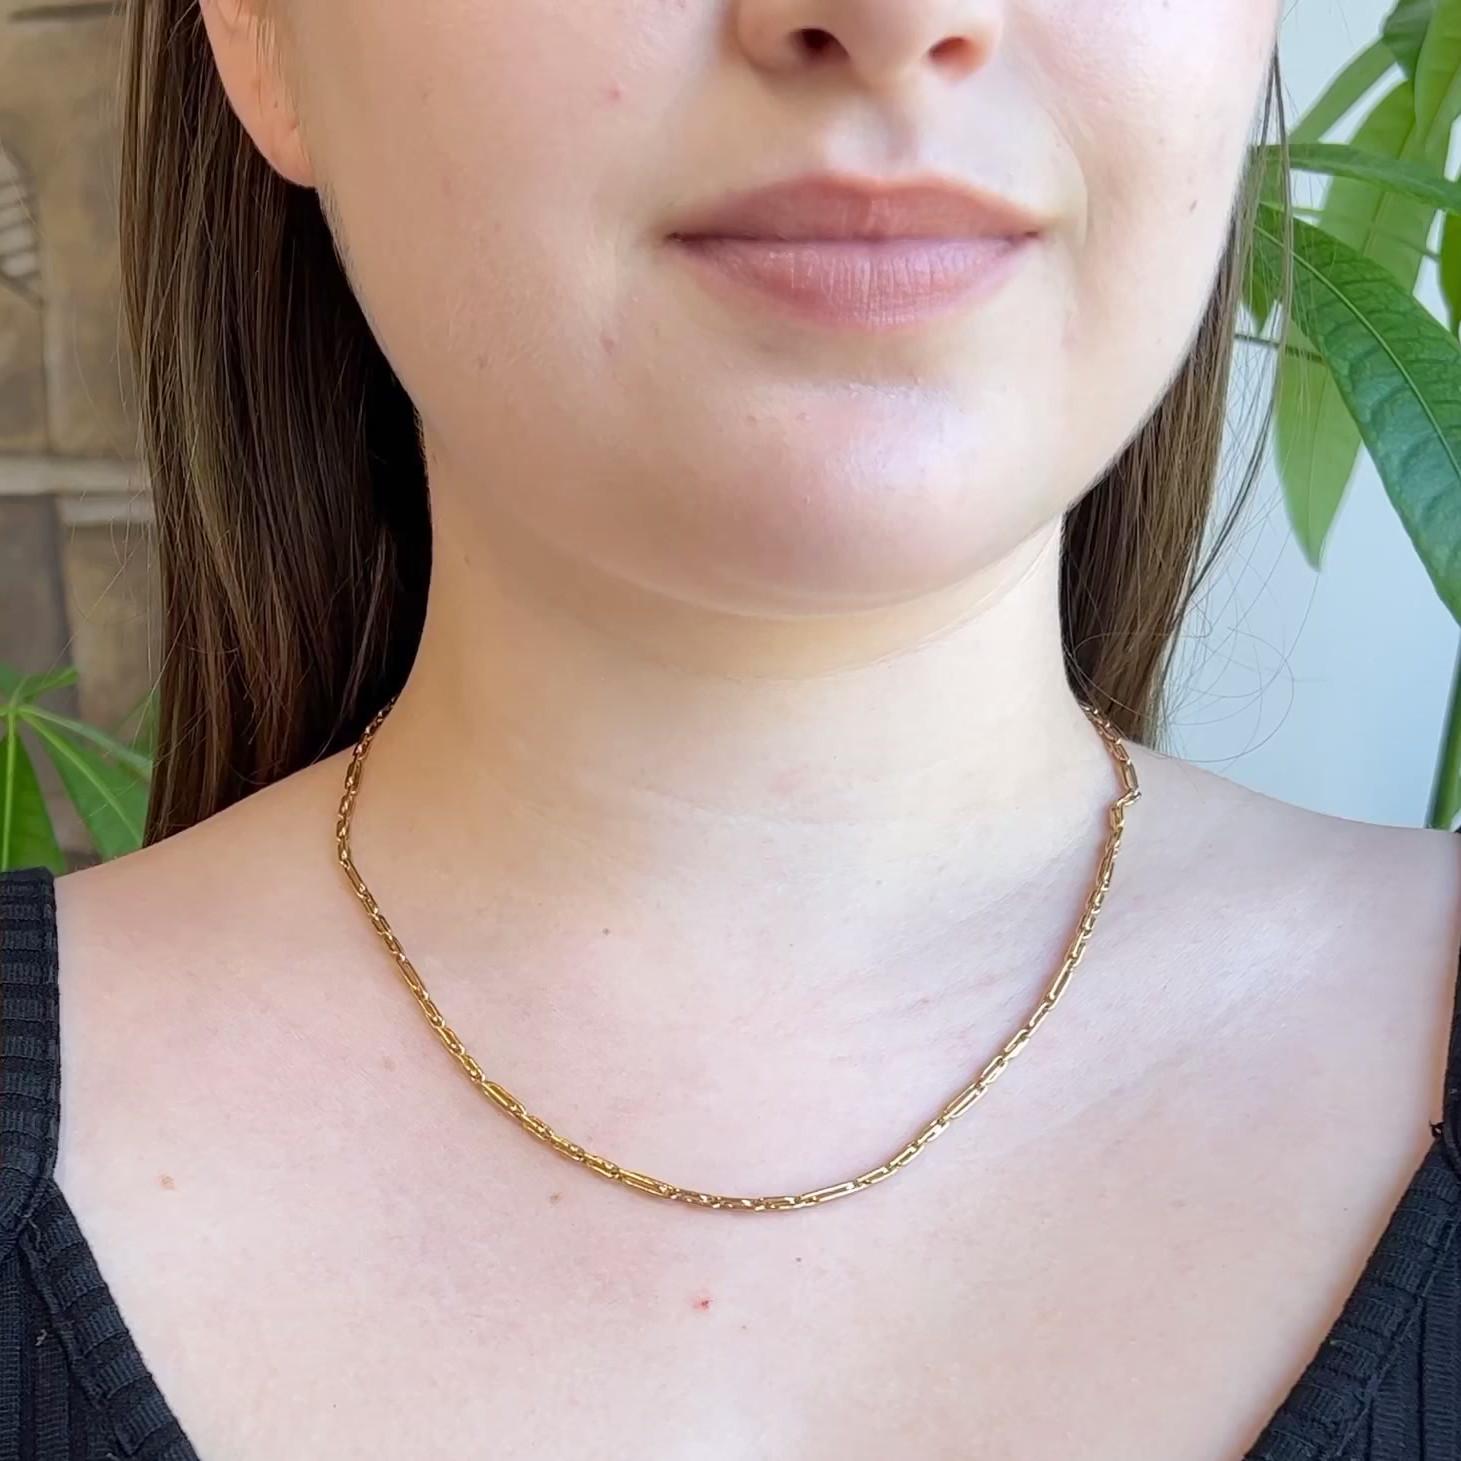 One Vintage Italian 18 Karat Yellow Gold Paperclip Link Chain Necklace. Crafted in 18 karat yellow gold with Italian hallmarks. Circa 1980. The necklace is 18 1/2 inches in length.

About this Item: Adorn your neck with sleek gold when you wear this